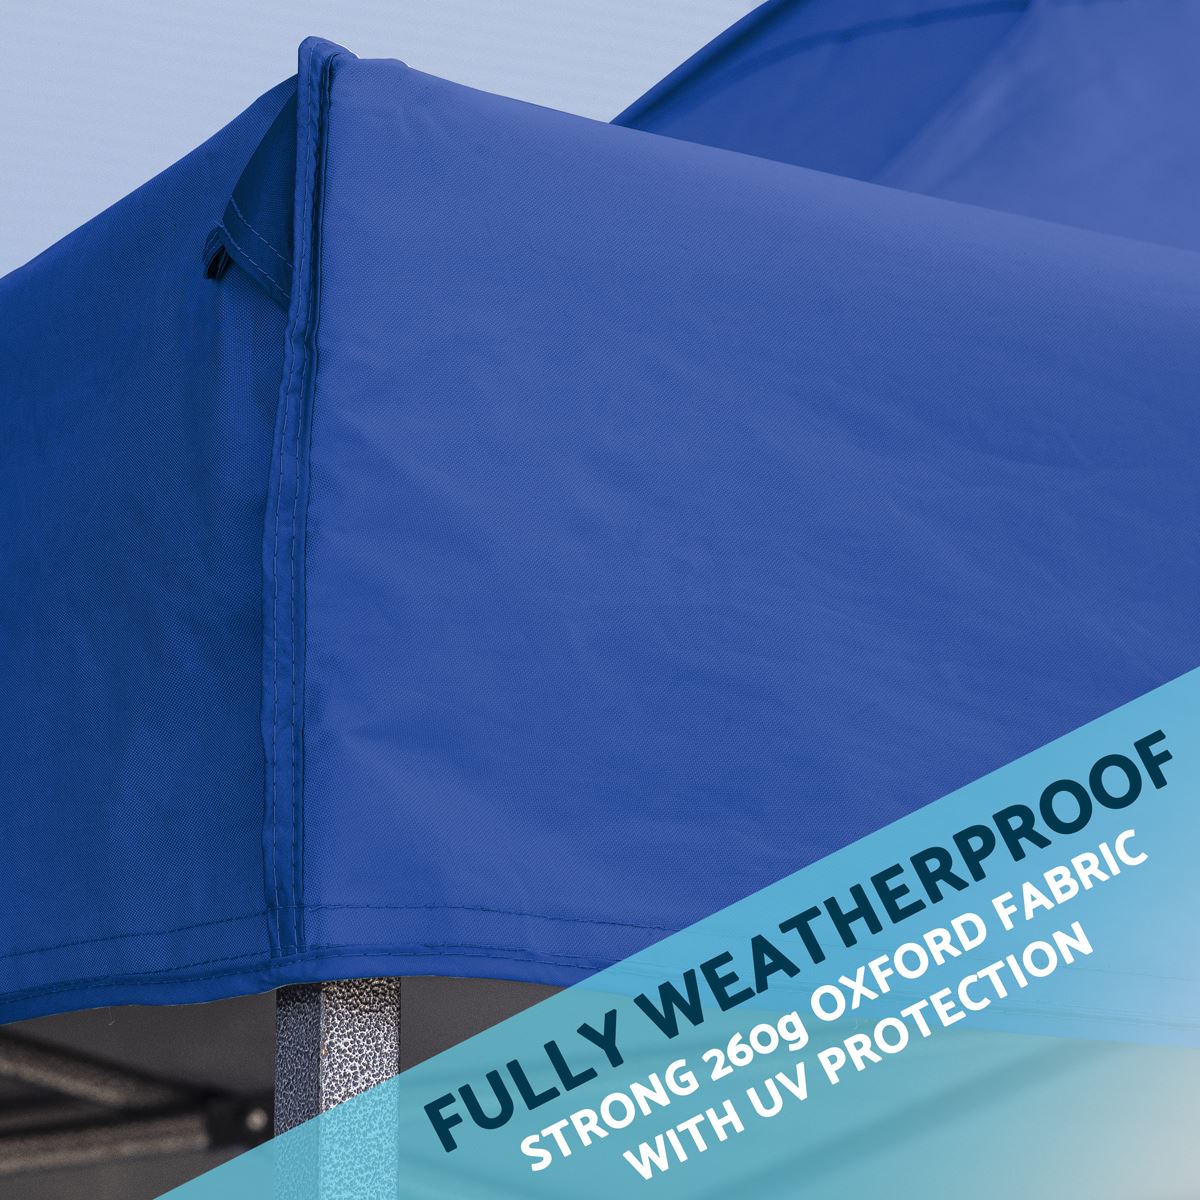 Dellonda Premium 3x6m Pop-Up Gazebo, Heavy Duty, PVC Coated, Water Resistant Fabric, Supplied with Carry Bag, Rope, Stakes & Weight Bags - Blue Canopy